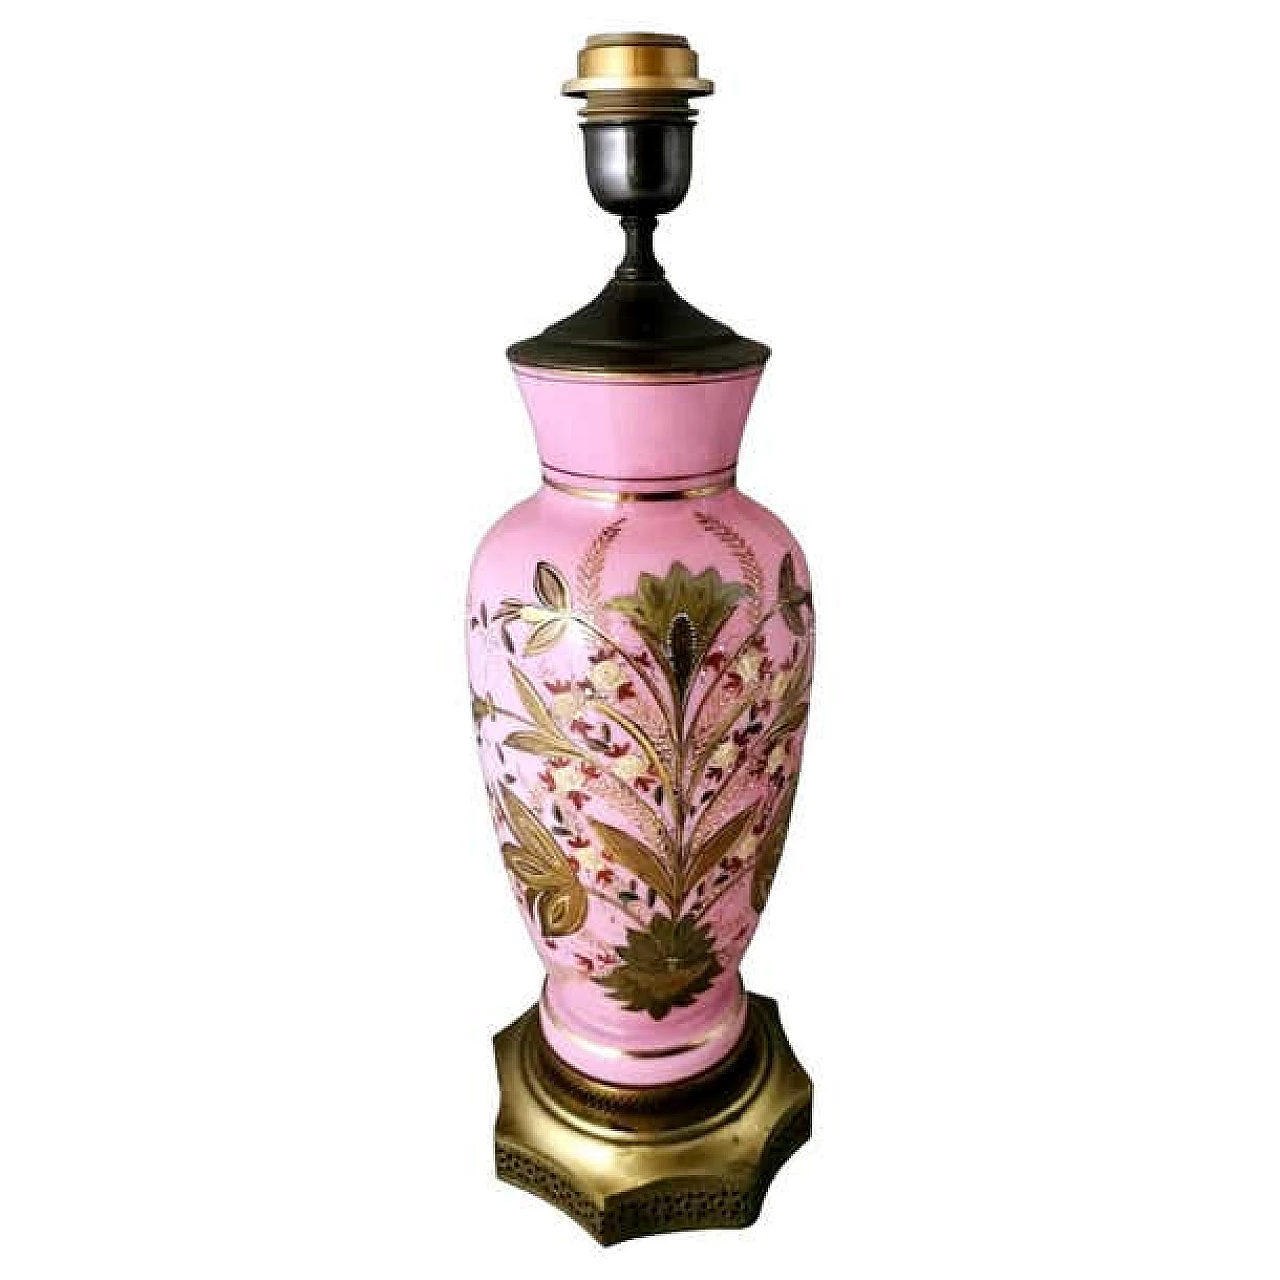 Napoleon III style table lamp in hand-painted opaline glass, late 19th century 21